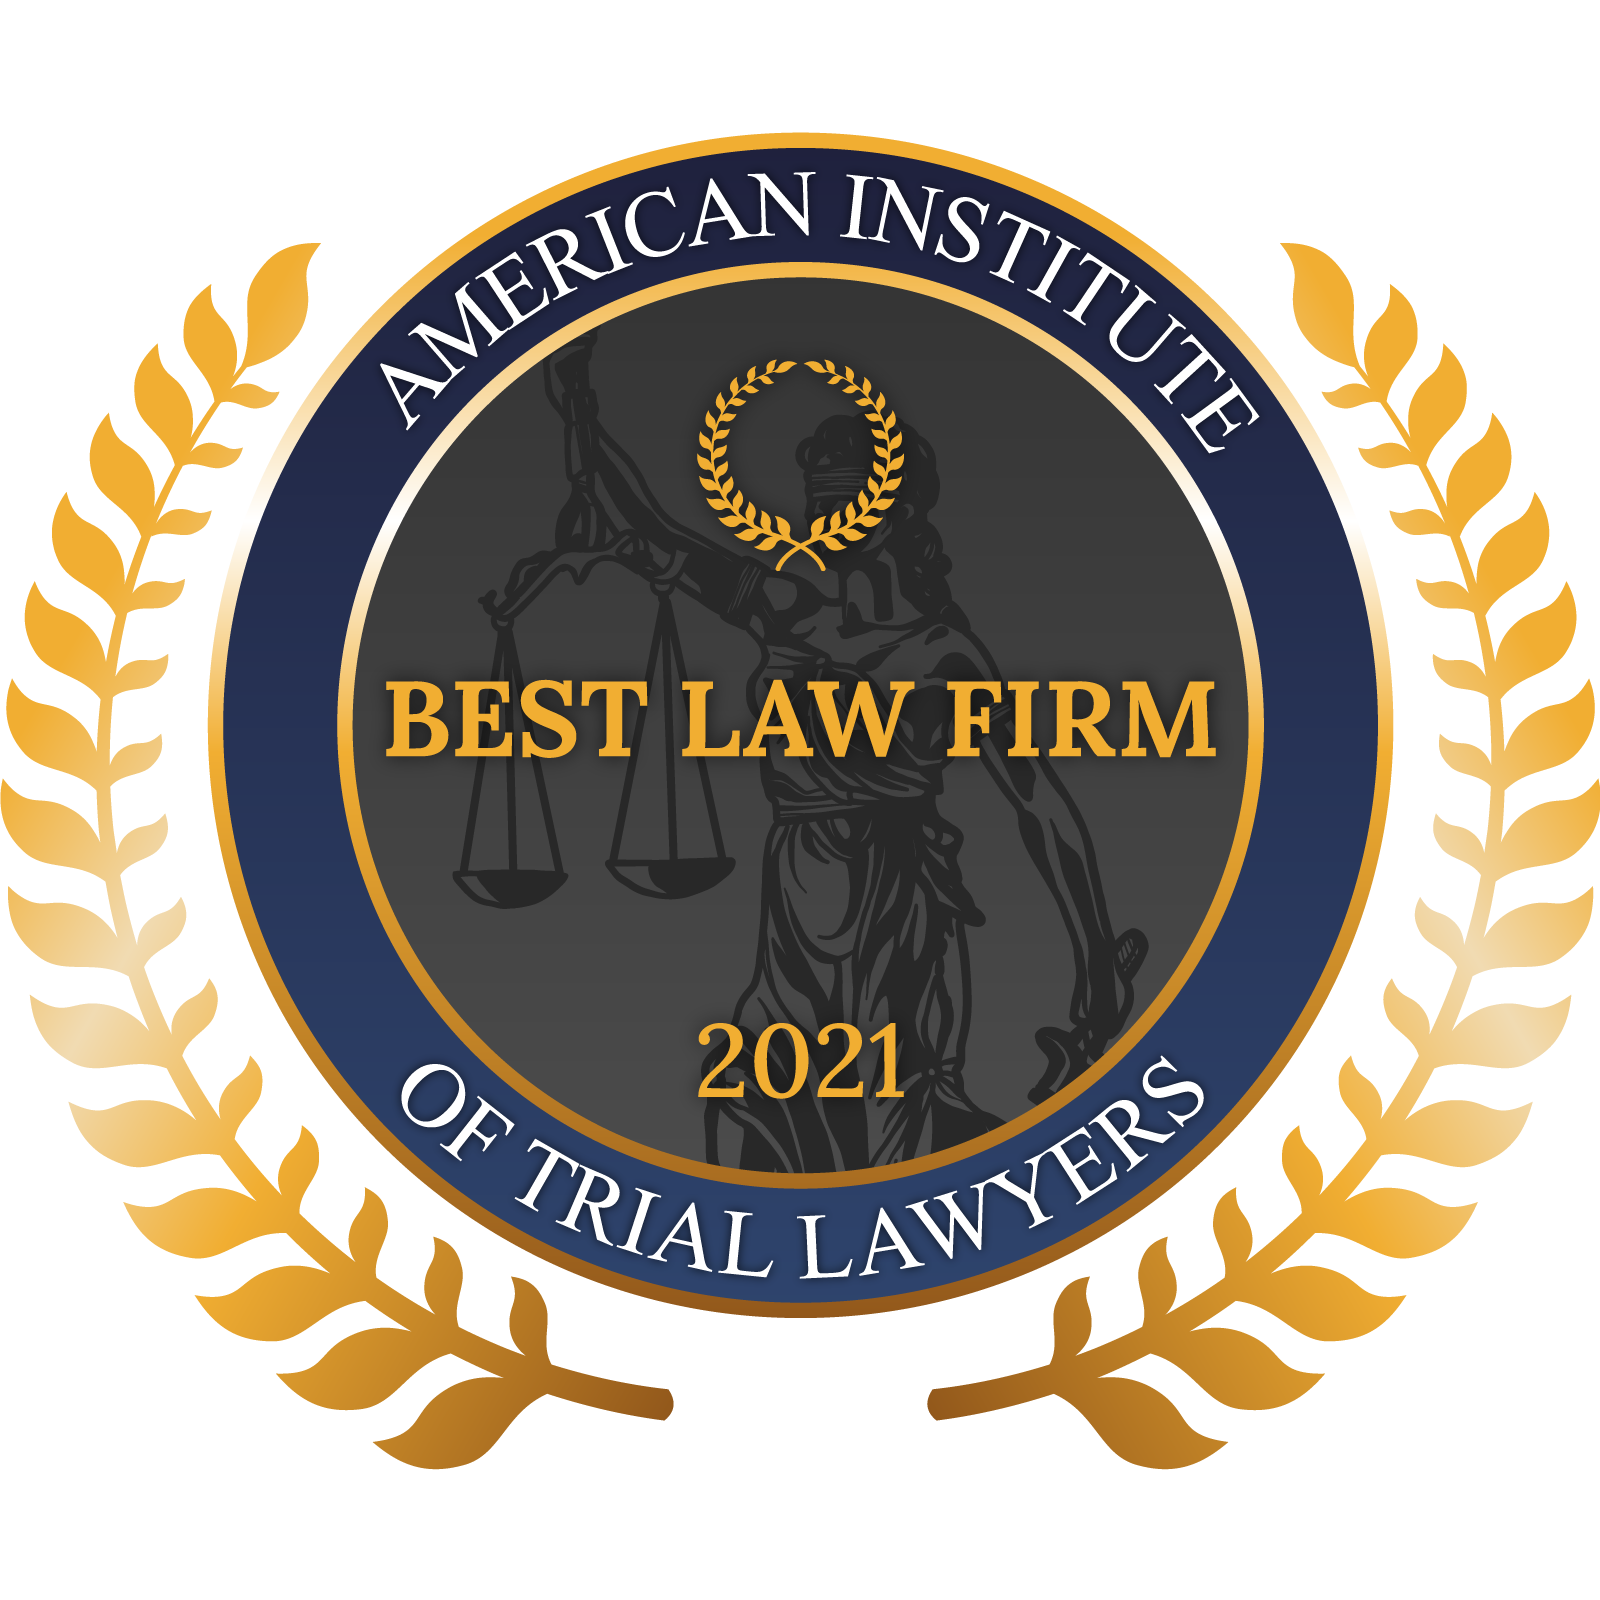 Jennie Levin American Institute of Trial Lawyers